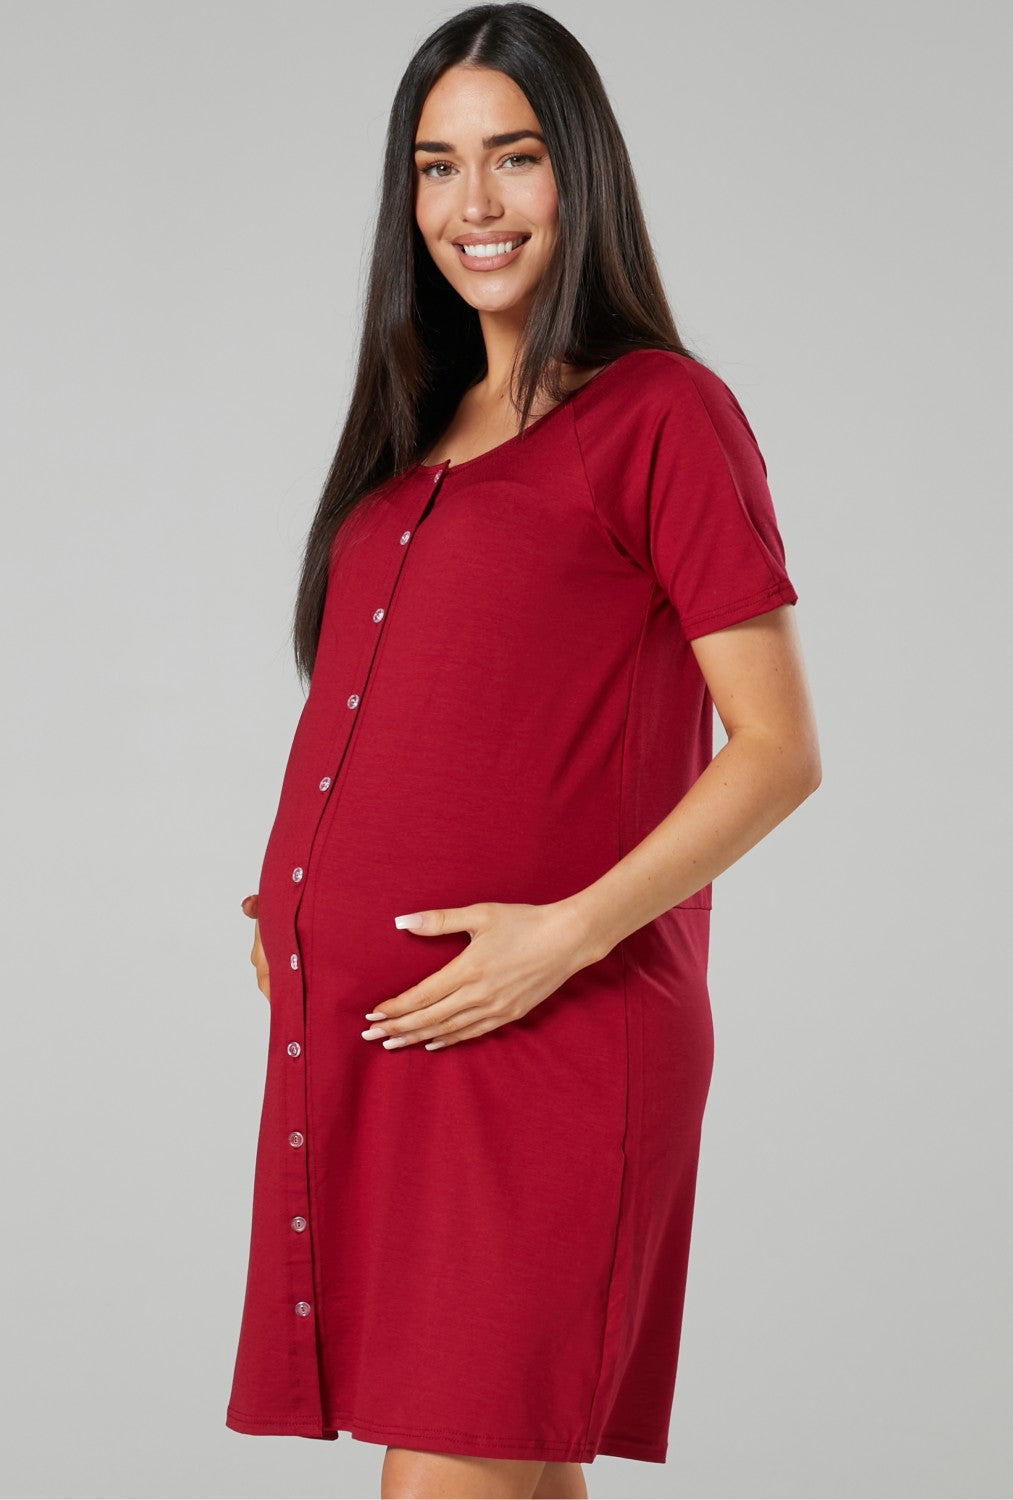 HAPPY MAMA Women's Maternity Breastfeeding Nightdress for Labour 2-Pack 1512